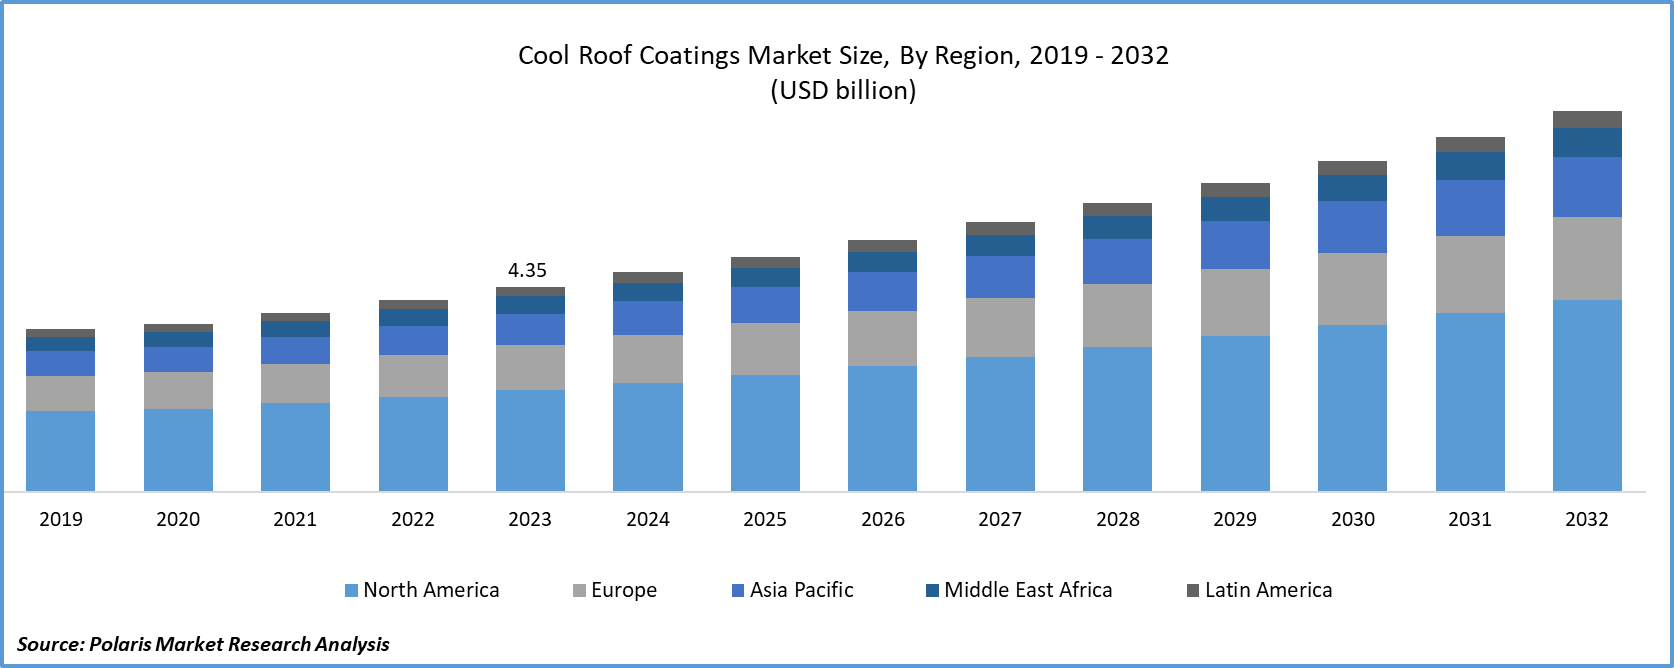 Cool Roof Coatings Market Size